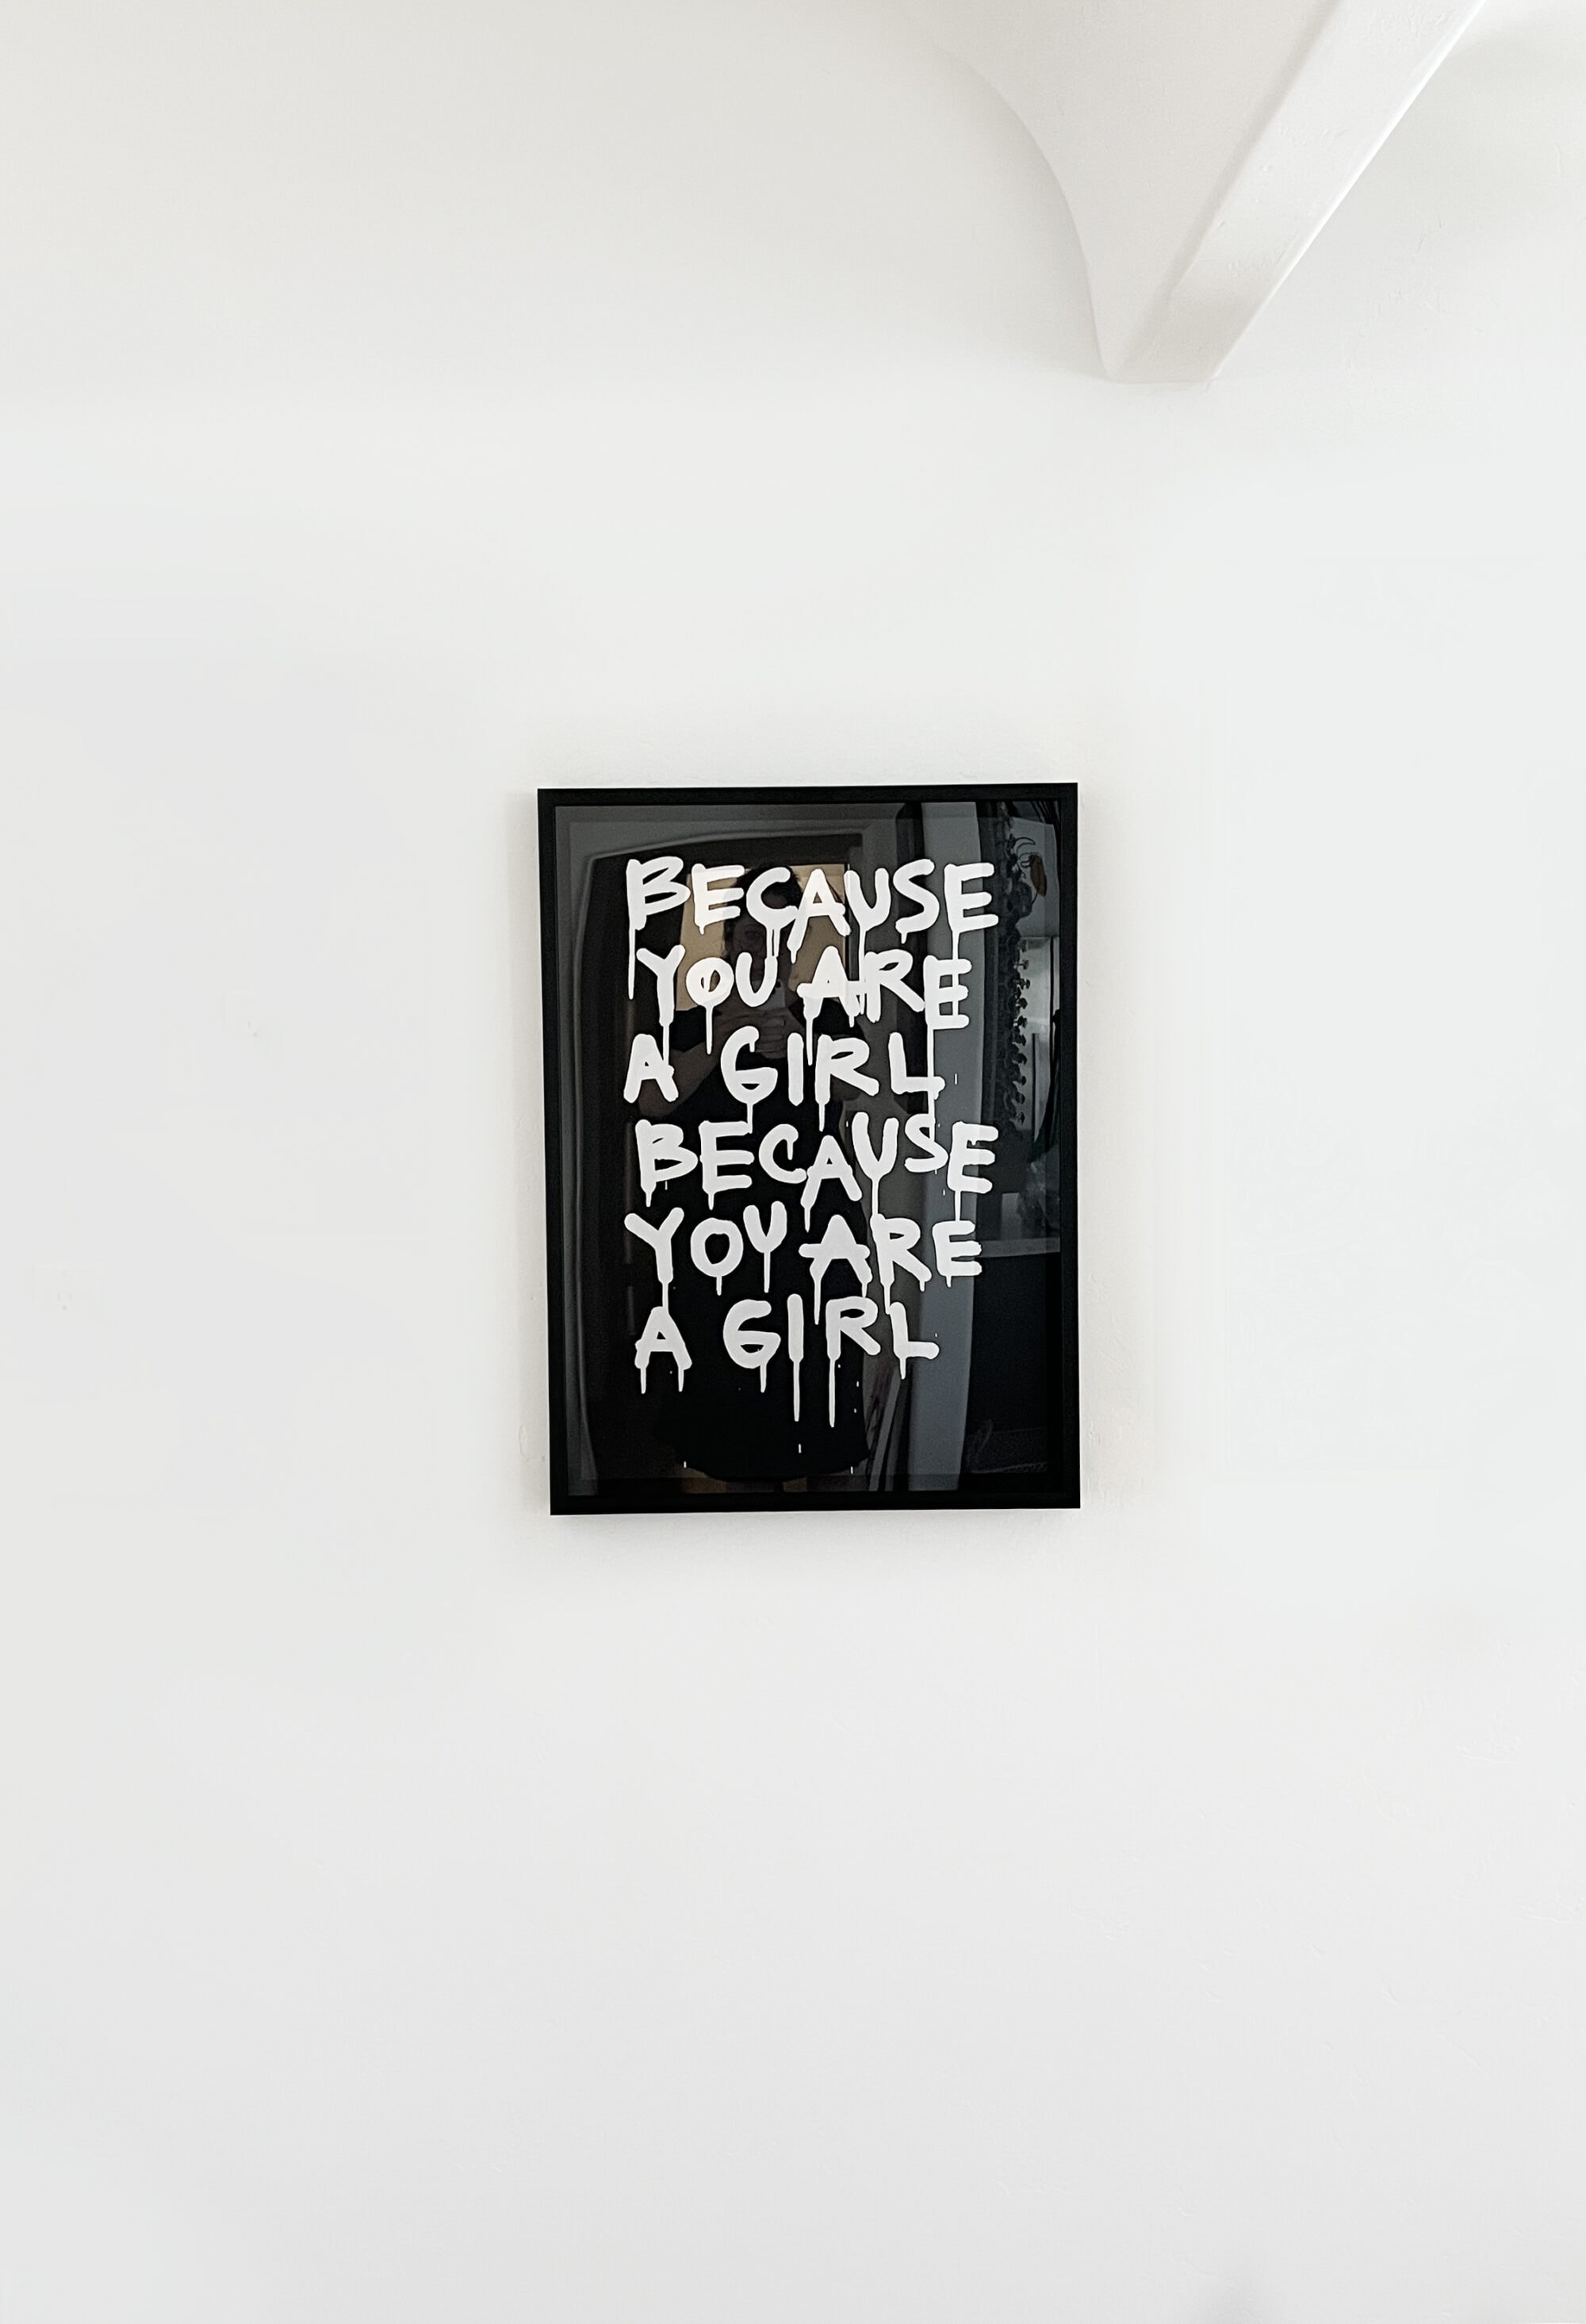 Eugenia Martinez_BECAUSE YOU ARE A GIRL_30.5 x 22.5 inches_metallic paint on hand made paper